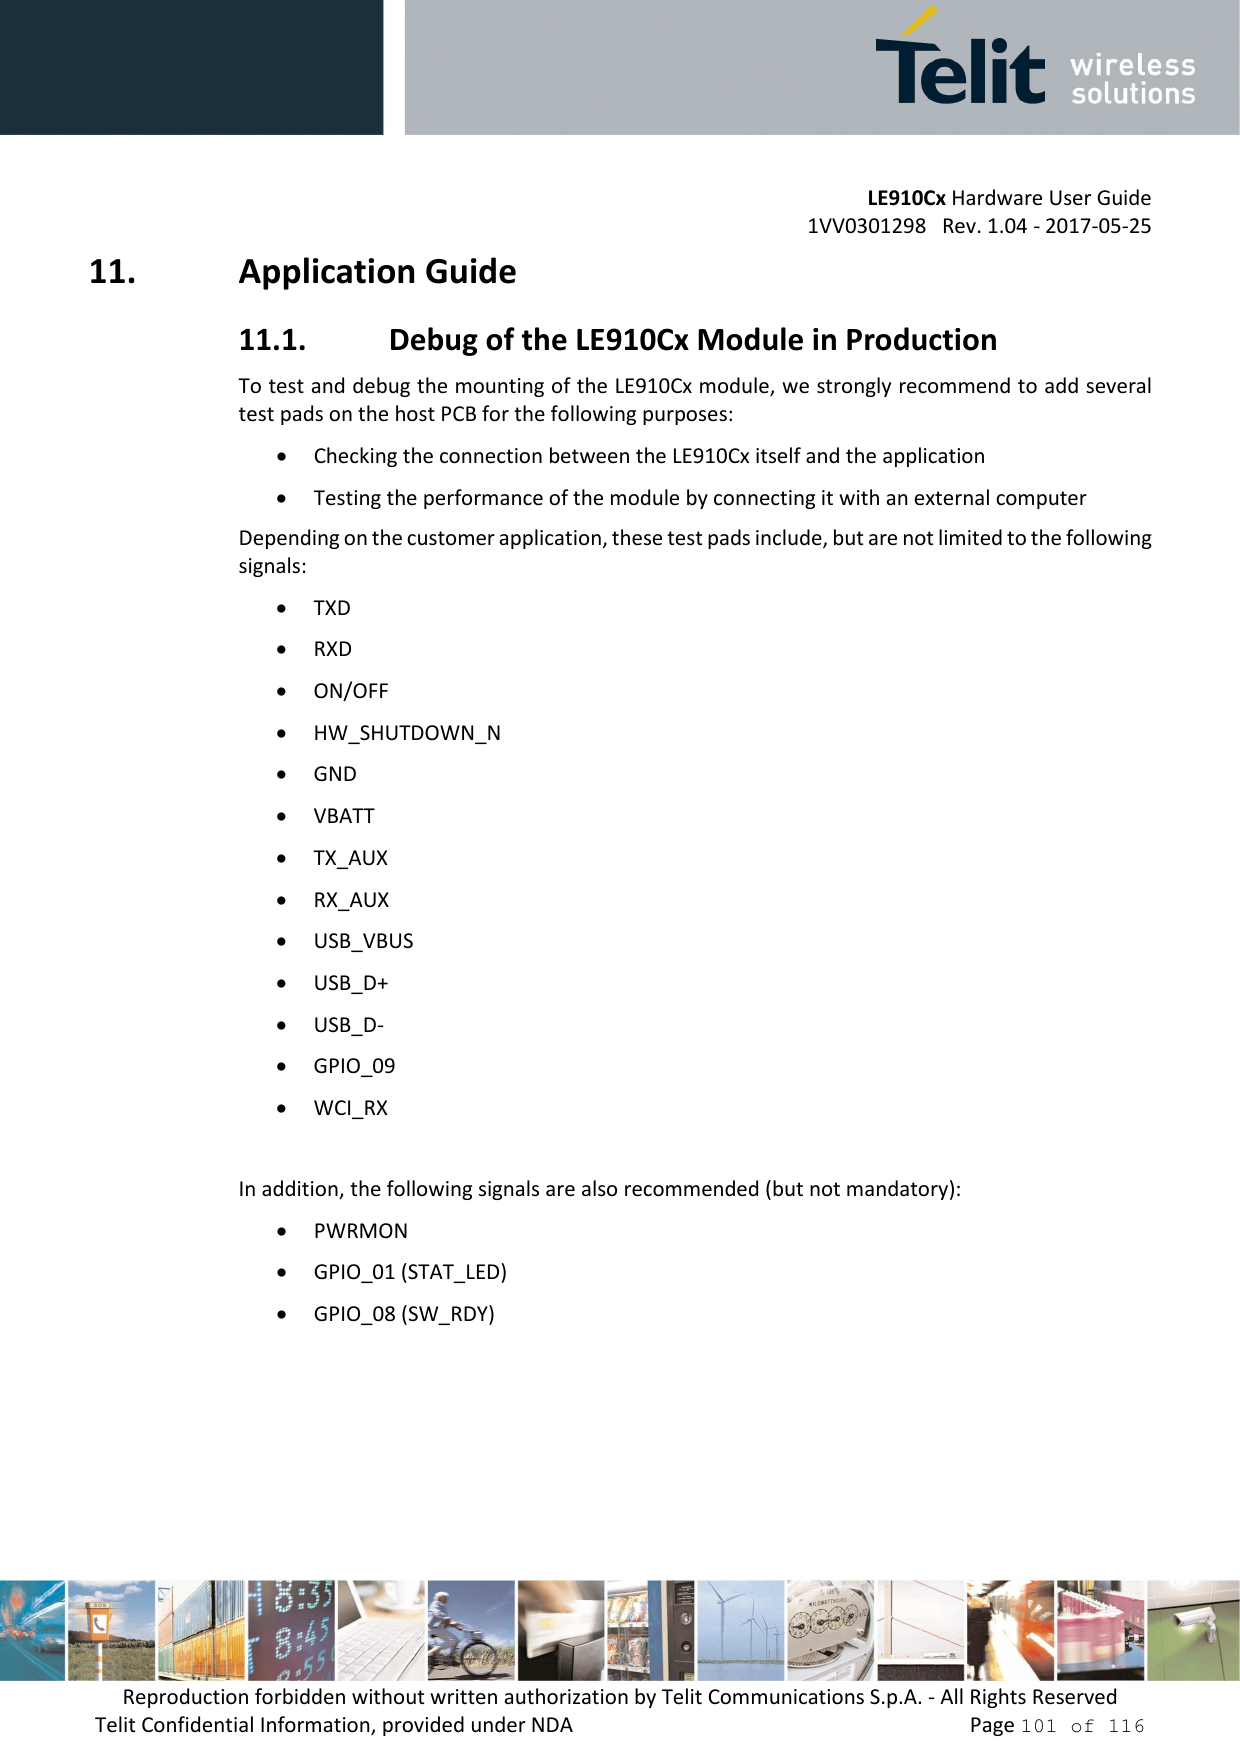         LE910Cx Hardware User Guide 1VV0301298   Rev. 1.04 - 2017-05-25 Reproduction forbidden without written authorization by Telit Communications S.p.A. - All Rights Reserved Telit Confidential Information, provided under NDA                 Page 101 of 116 11. Application Guide 11.1. Debug of the LE910Cx Module in Production To test and debug the mounting of the LE910Cx module, we strongly recommend to add several test pads on the host PCB for the following purposes: • Checking the connection between the LE910Cx itself and the application • Testing the performance of the module by connecting it with an external computer Depending on the customer application, these test pads include, but are not limited to the following signals: • TXD • RXD • ON/OFF • HW_SHUTDOWN_N • GND • VBATT • TX_AUX  • RX_AUX  • USB_VBUS • USB_D+ • USB_D- • GPIO_09   • WCI_RX  In addition, the following signals are also recommended (but not mandatory): • PWRMON  • GPIO_01 (STAT_LED) • GPIO_08 (SW_RDY)  